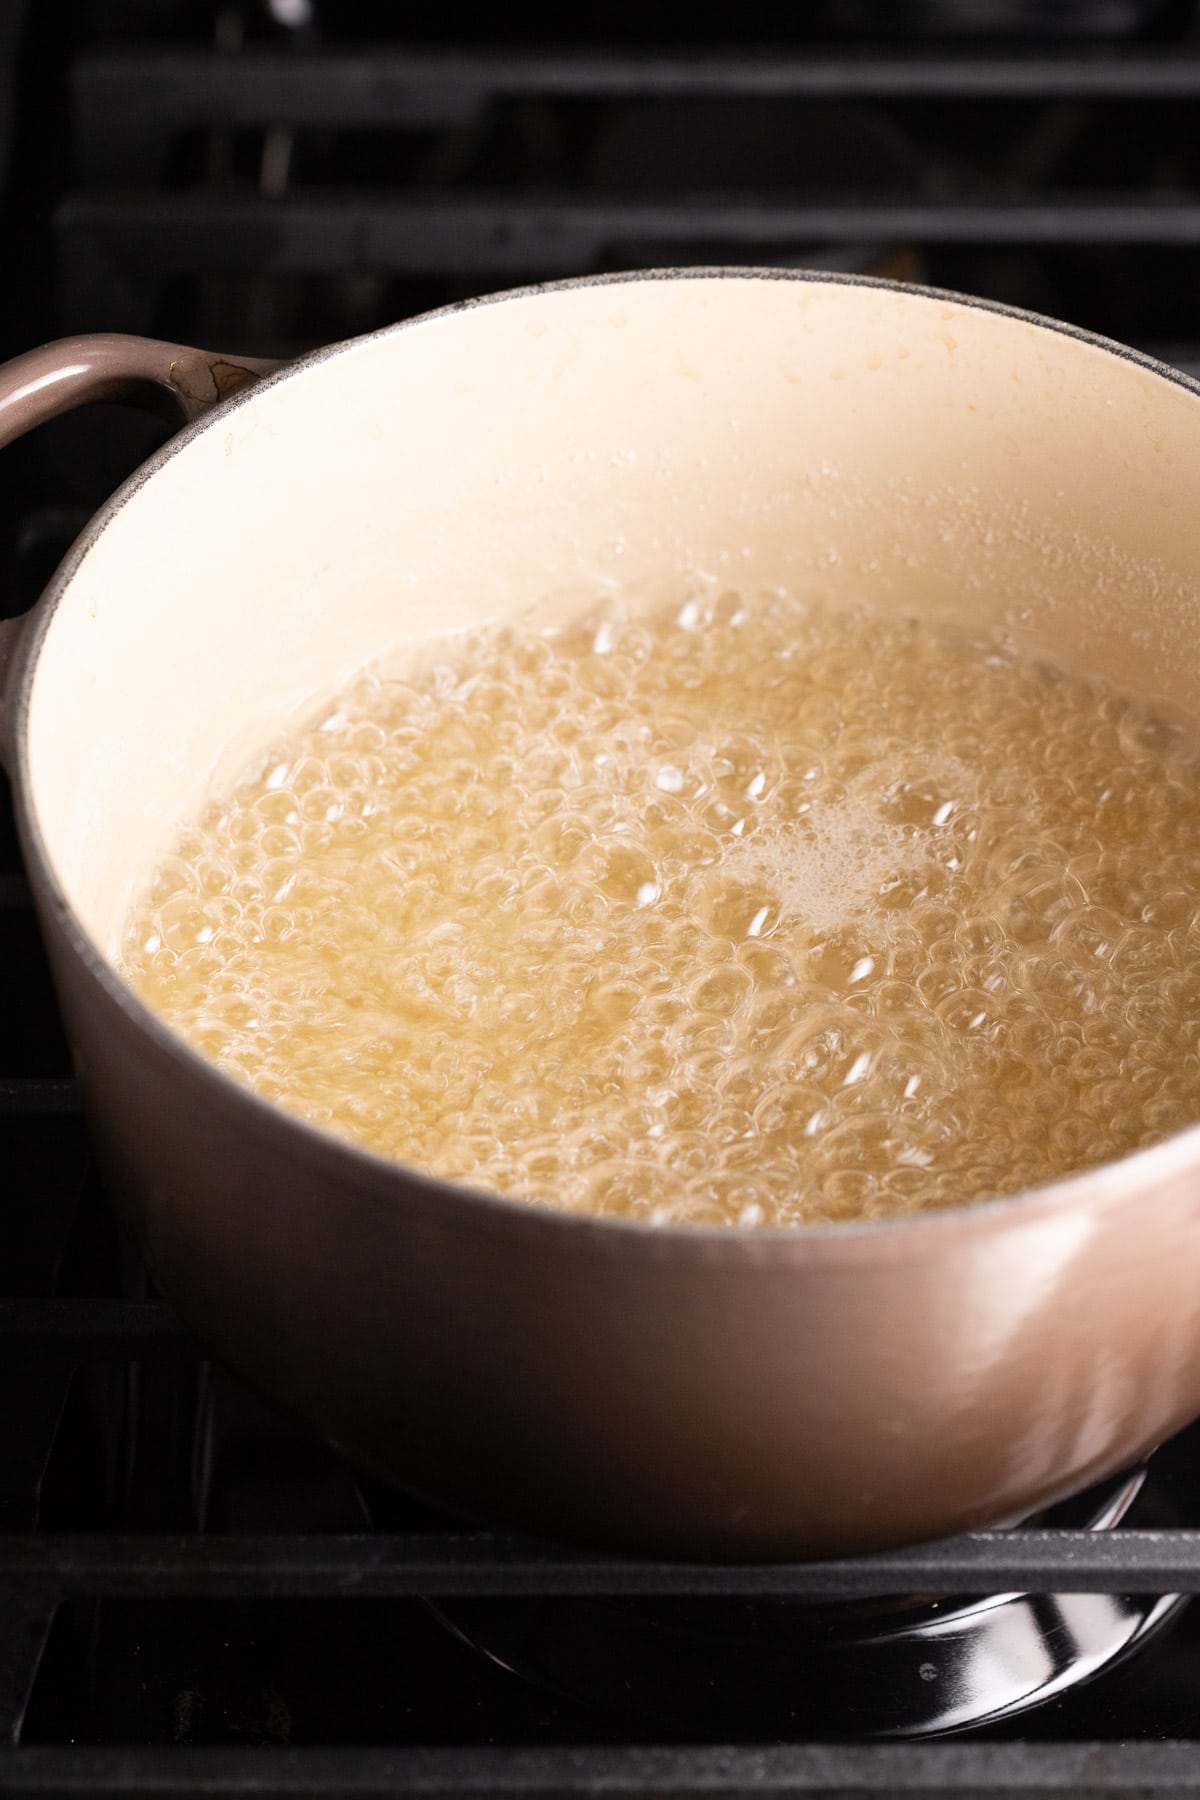 Sugar and water simmering in a pot on the stove.